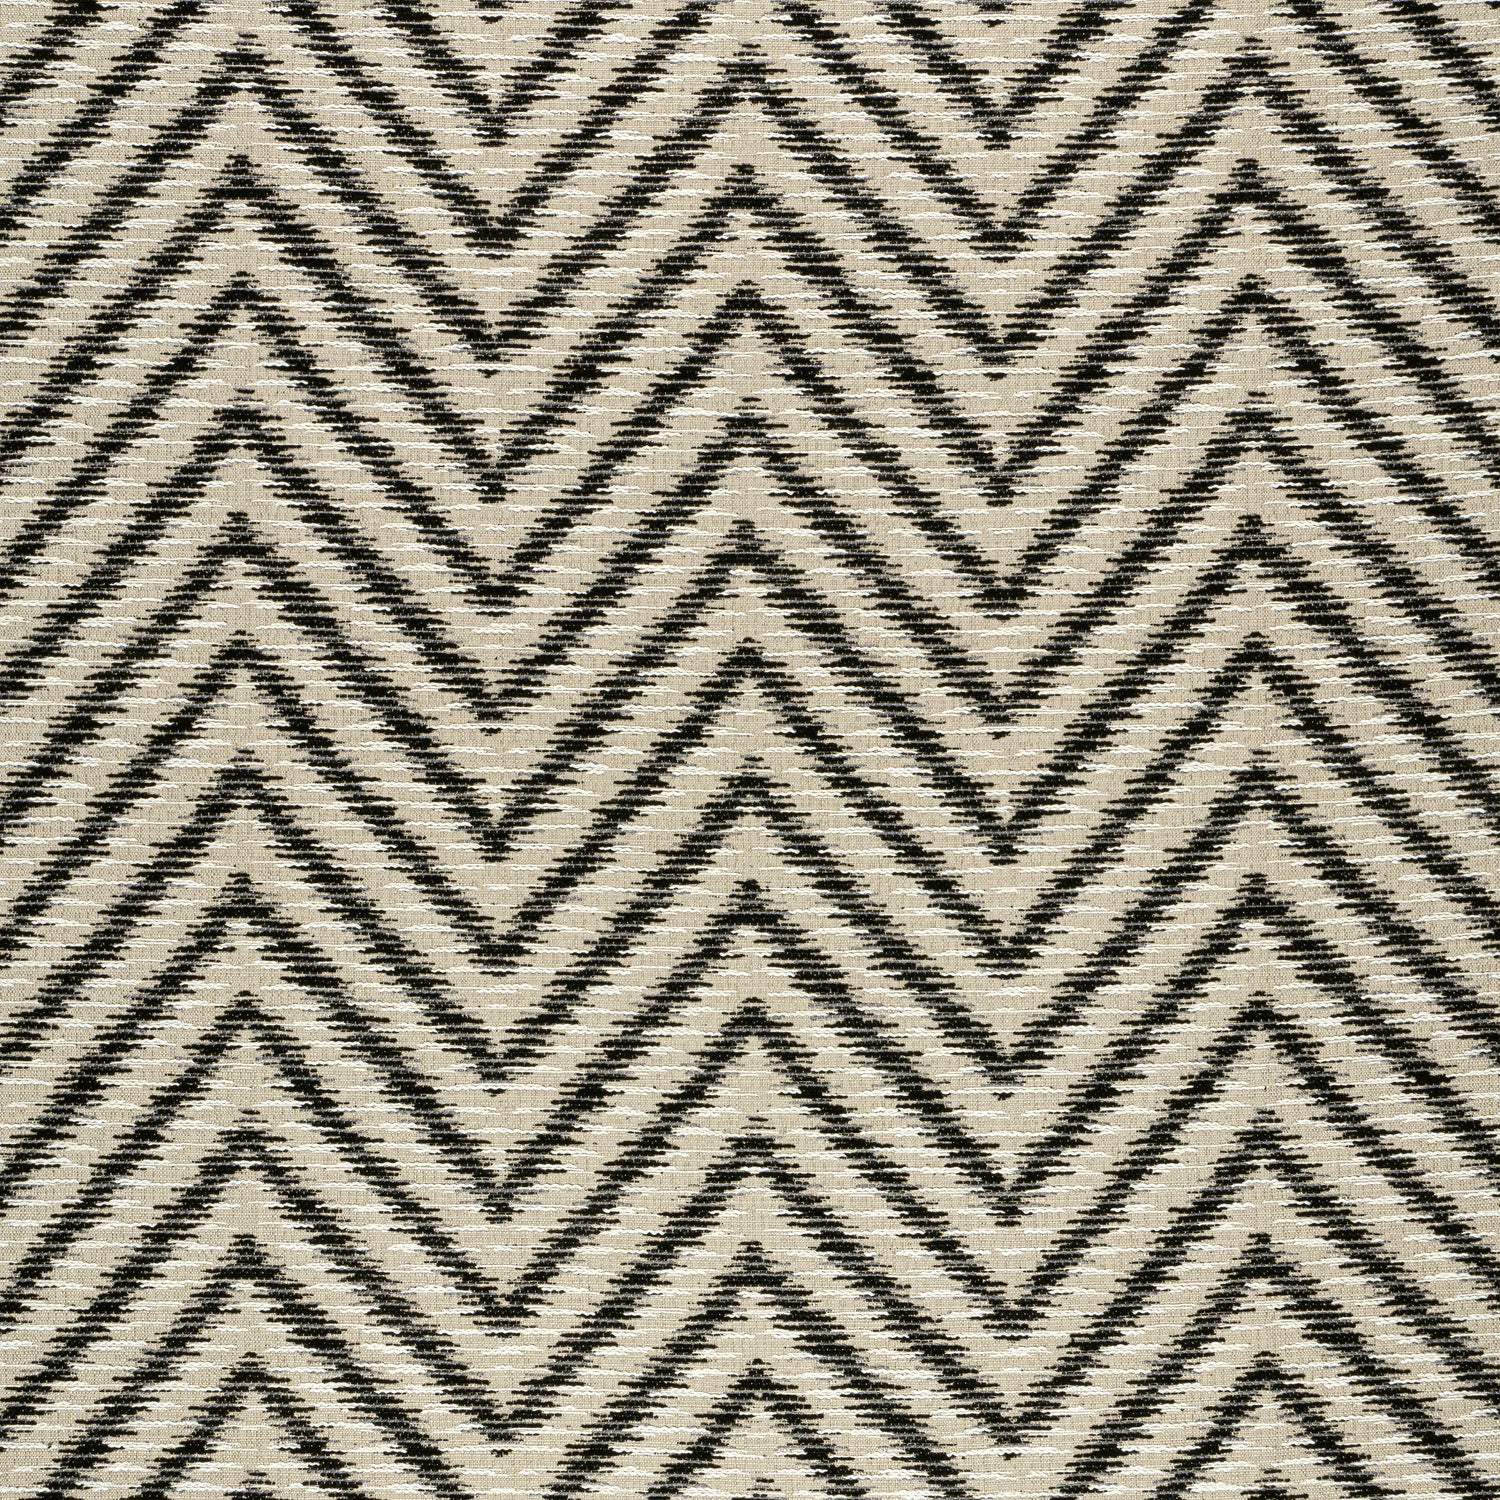 Aliso fabric in ebony color - pattern number W8824 - by Thibaut in the Haven collection